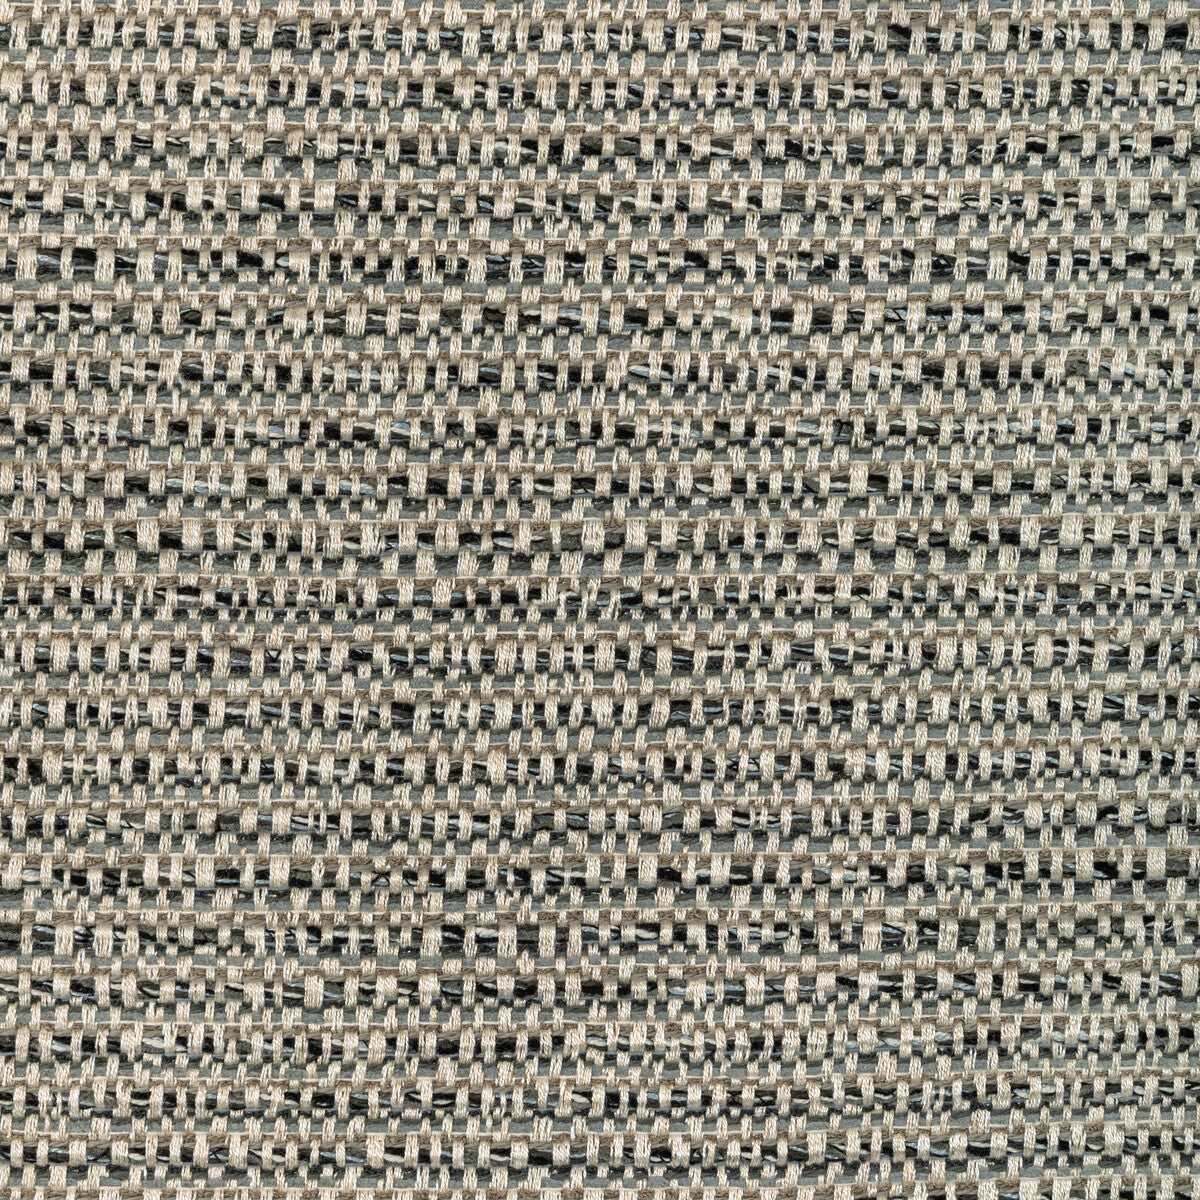 Kravet Design fabric in 36417-811 color - pattern 36417.811.0 - by Kravet Design in the Performance Crypton Home collection